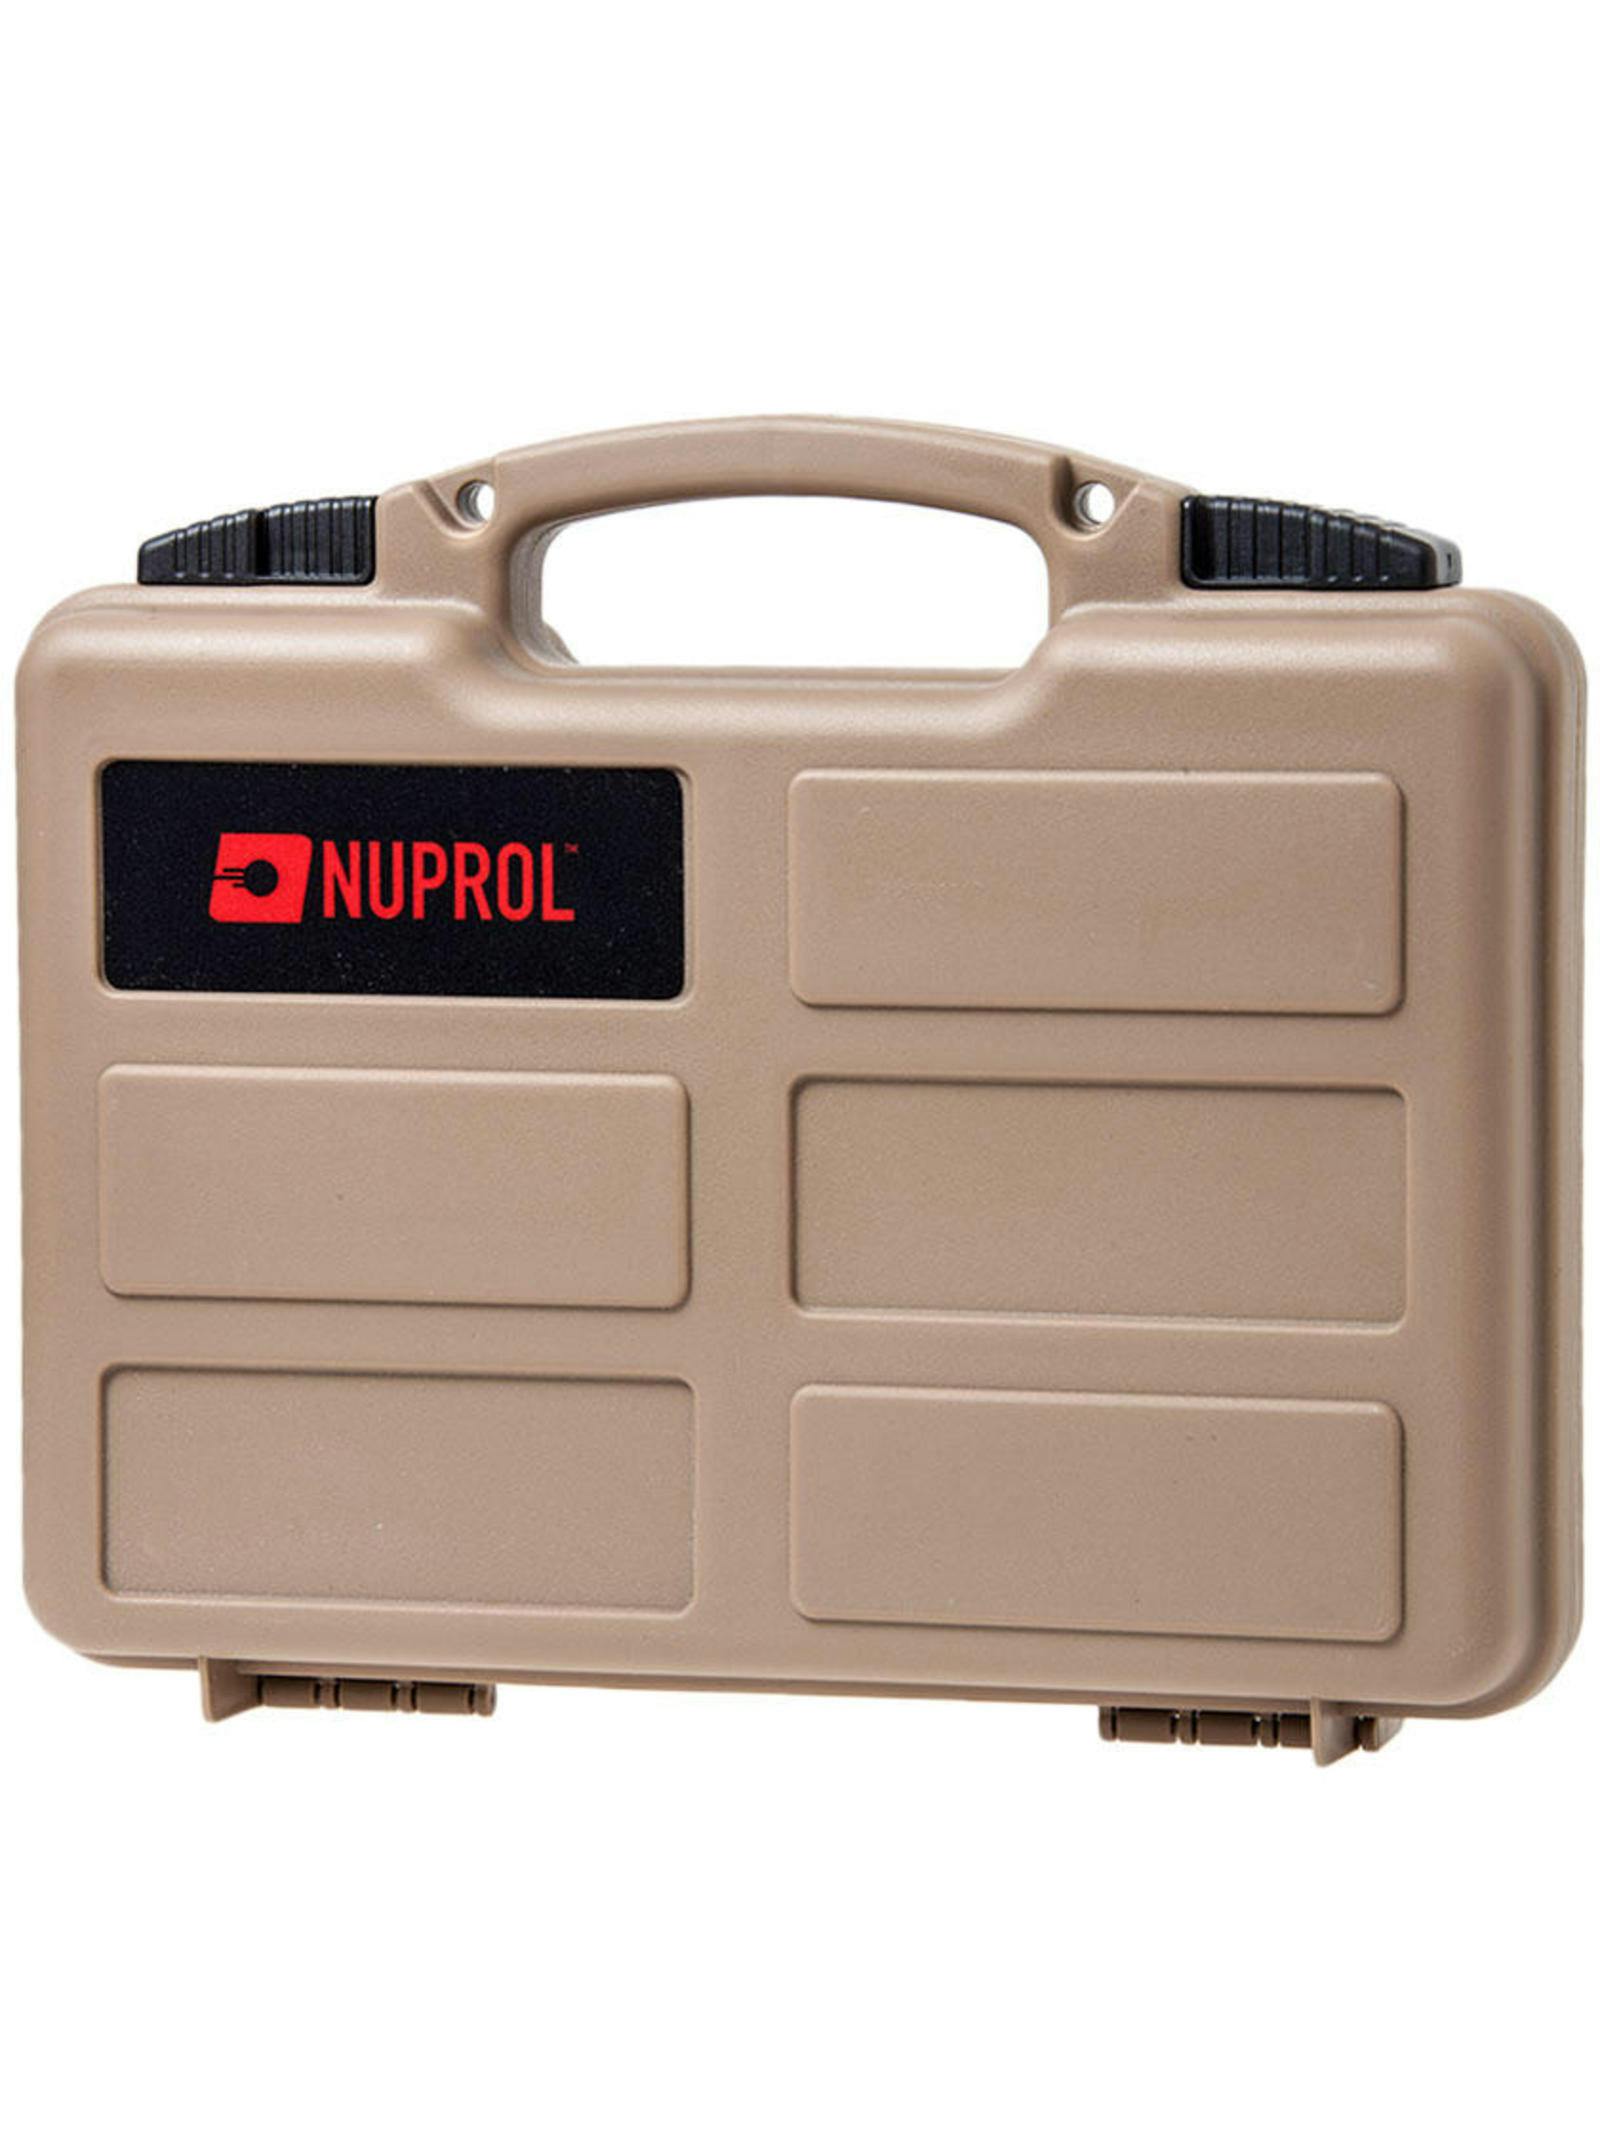 Nuprol Small Hard Pistol Case with Wave Foam System, Green